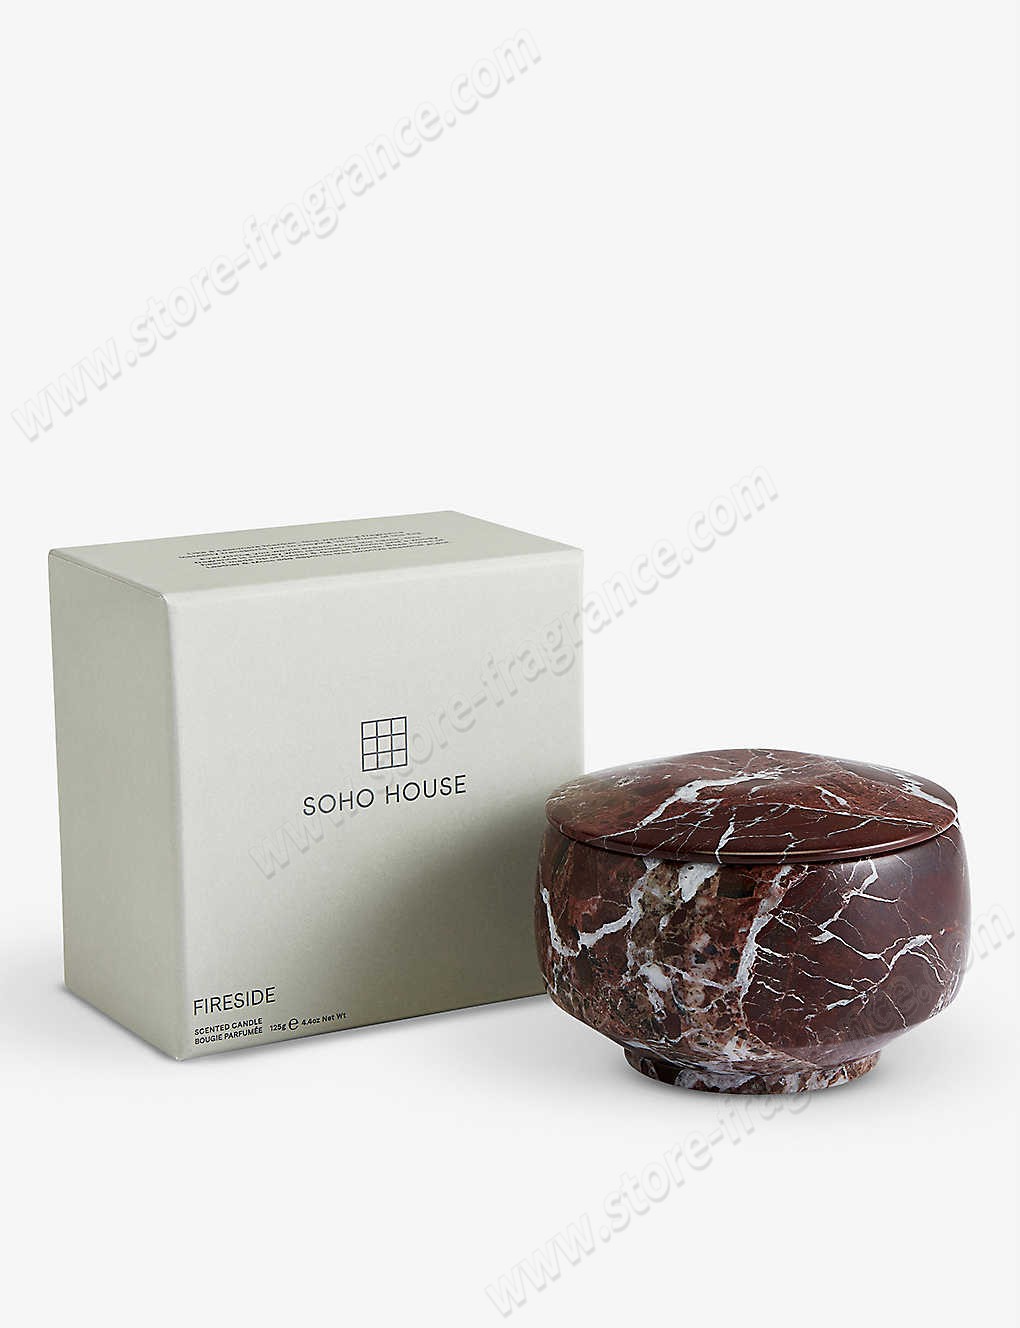 SOHO HOME/Rocca fireside scented marble candle 125g ✿ Discount Store - SOHO HOME/Rocca fireside scented marble candle 125g ✿ Discount Store